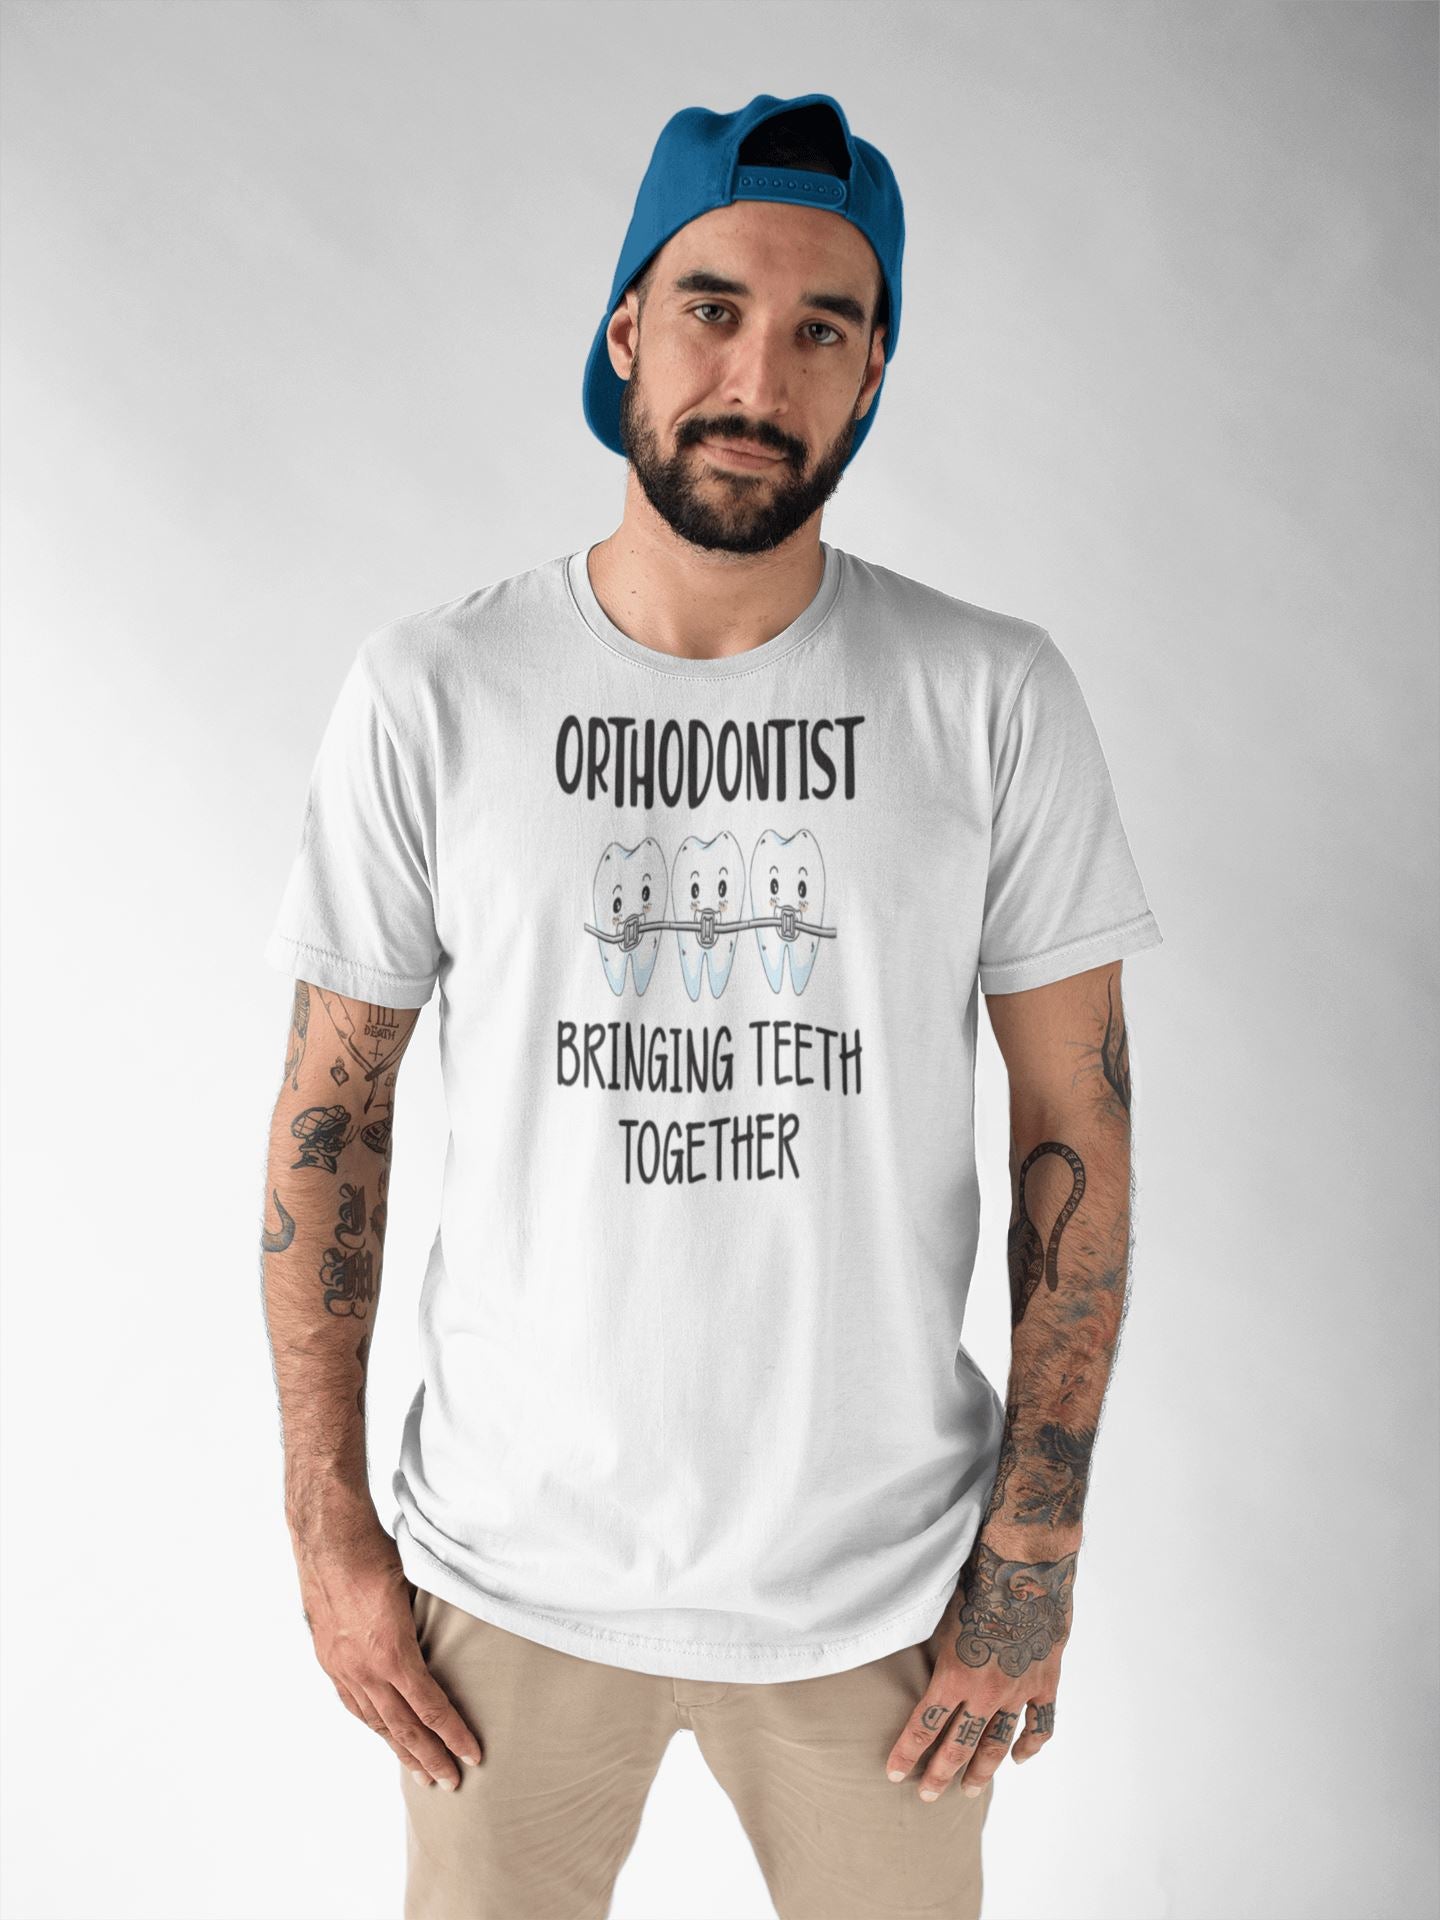 Orthodontist Bringing Teeth Together Special T Shirt for Men and Women Dentists - Catch My Drift India  black, clothing, dentist, doctor, made in india, orthodontist, shirt, t shirt, tshirt